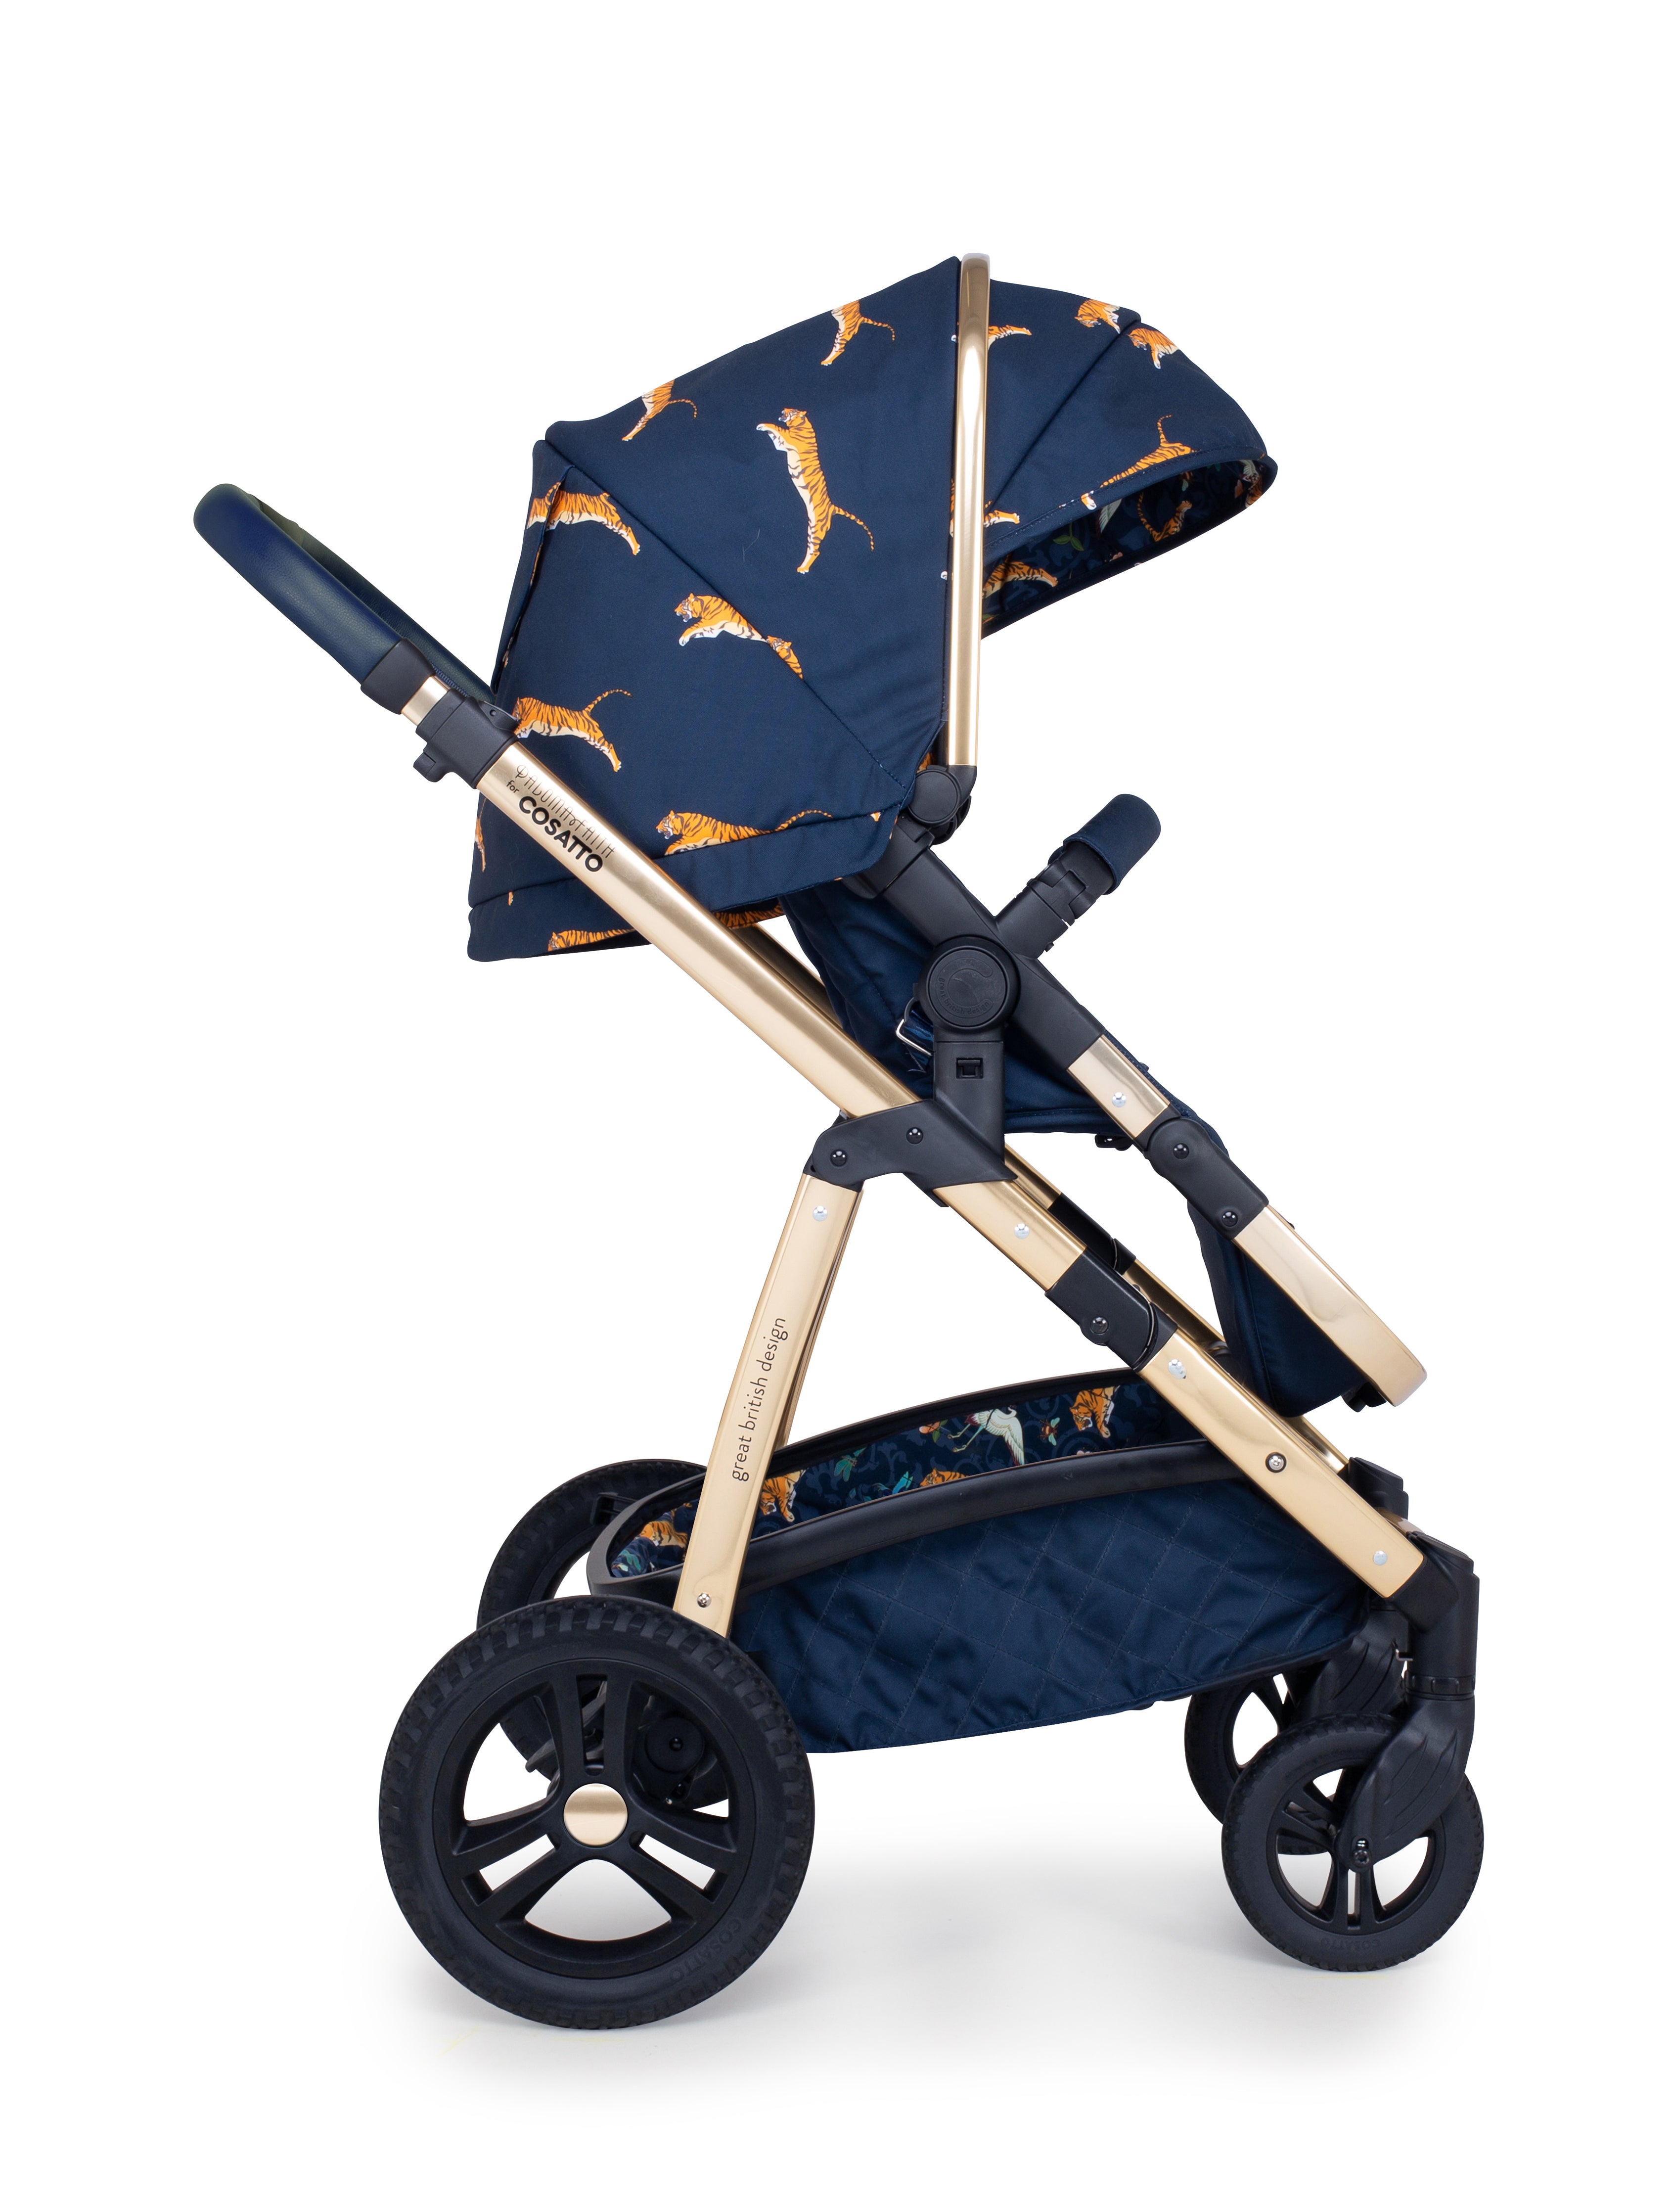 Wow 2 Pram and Accessories Bundle On The Prowl